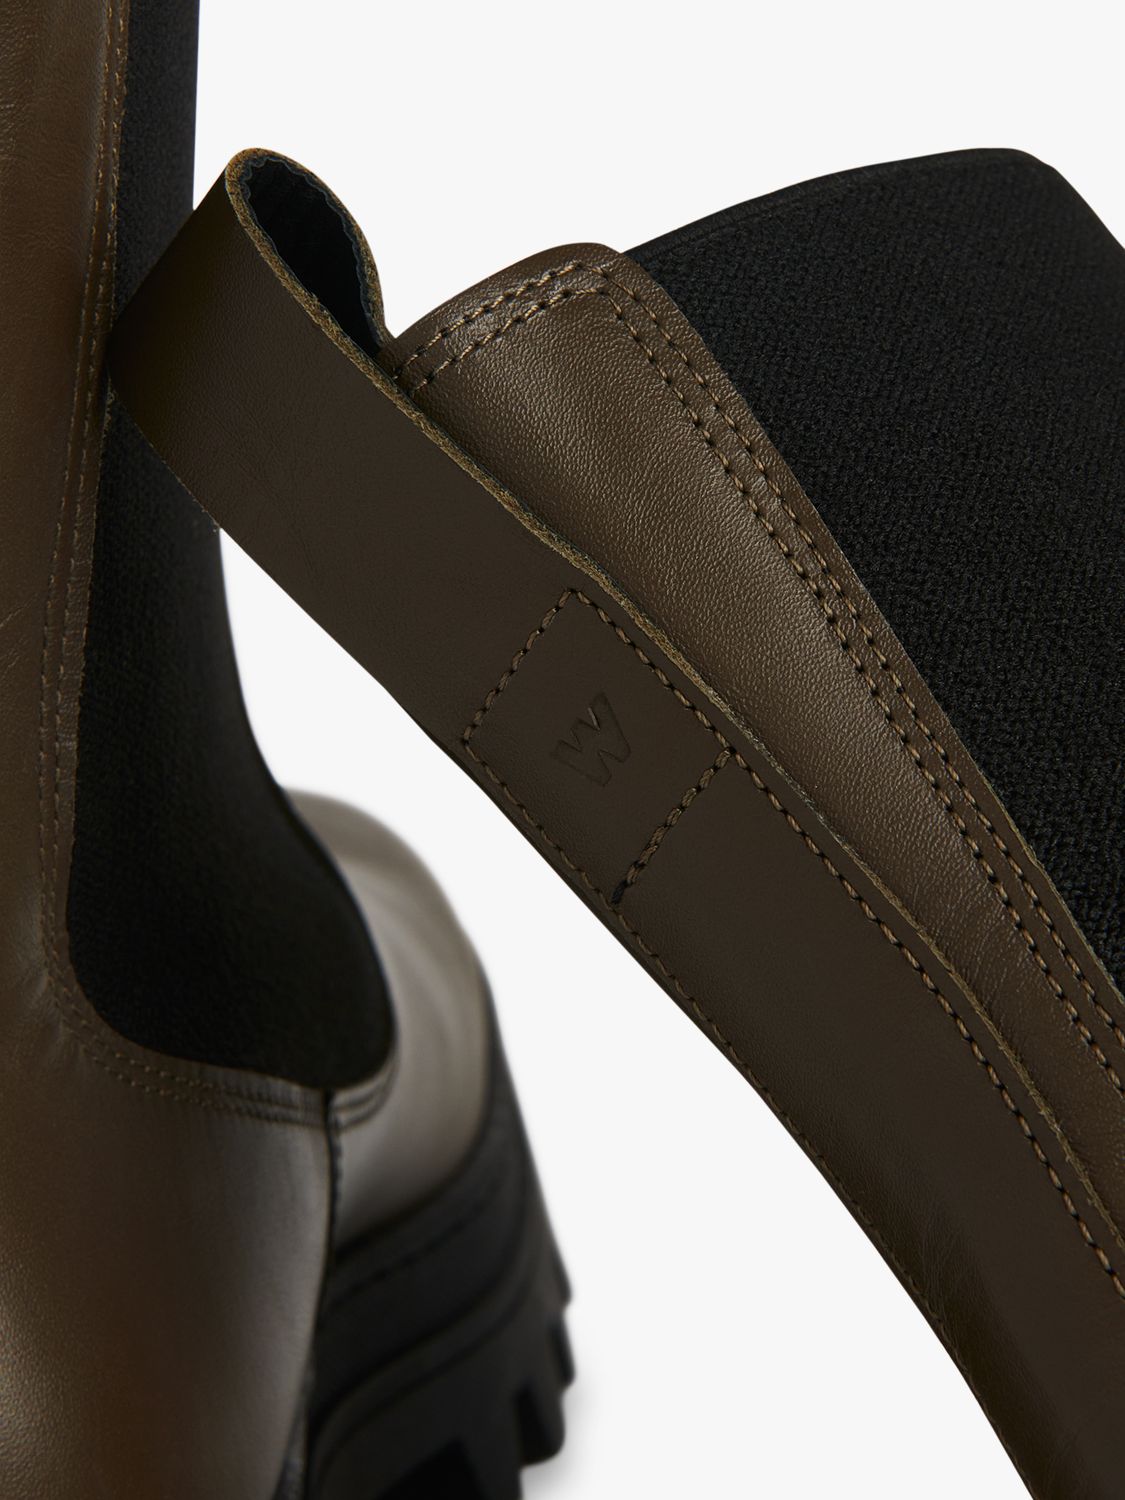 Buy Whistles Hatton Chunky Leather Chelsea Boots Online at johnlewis.com